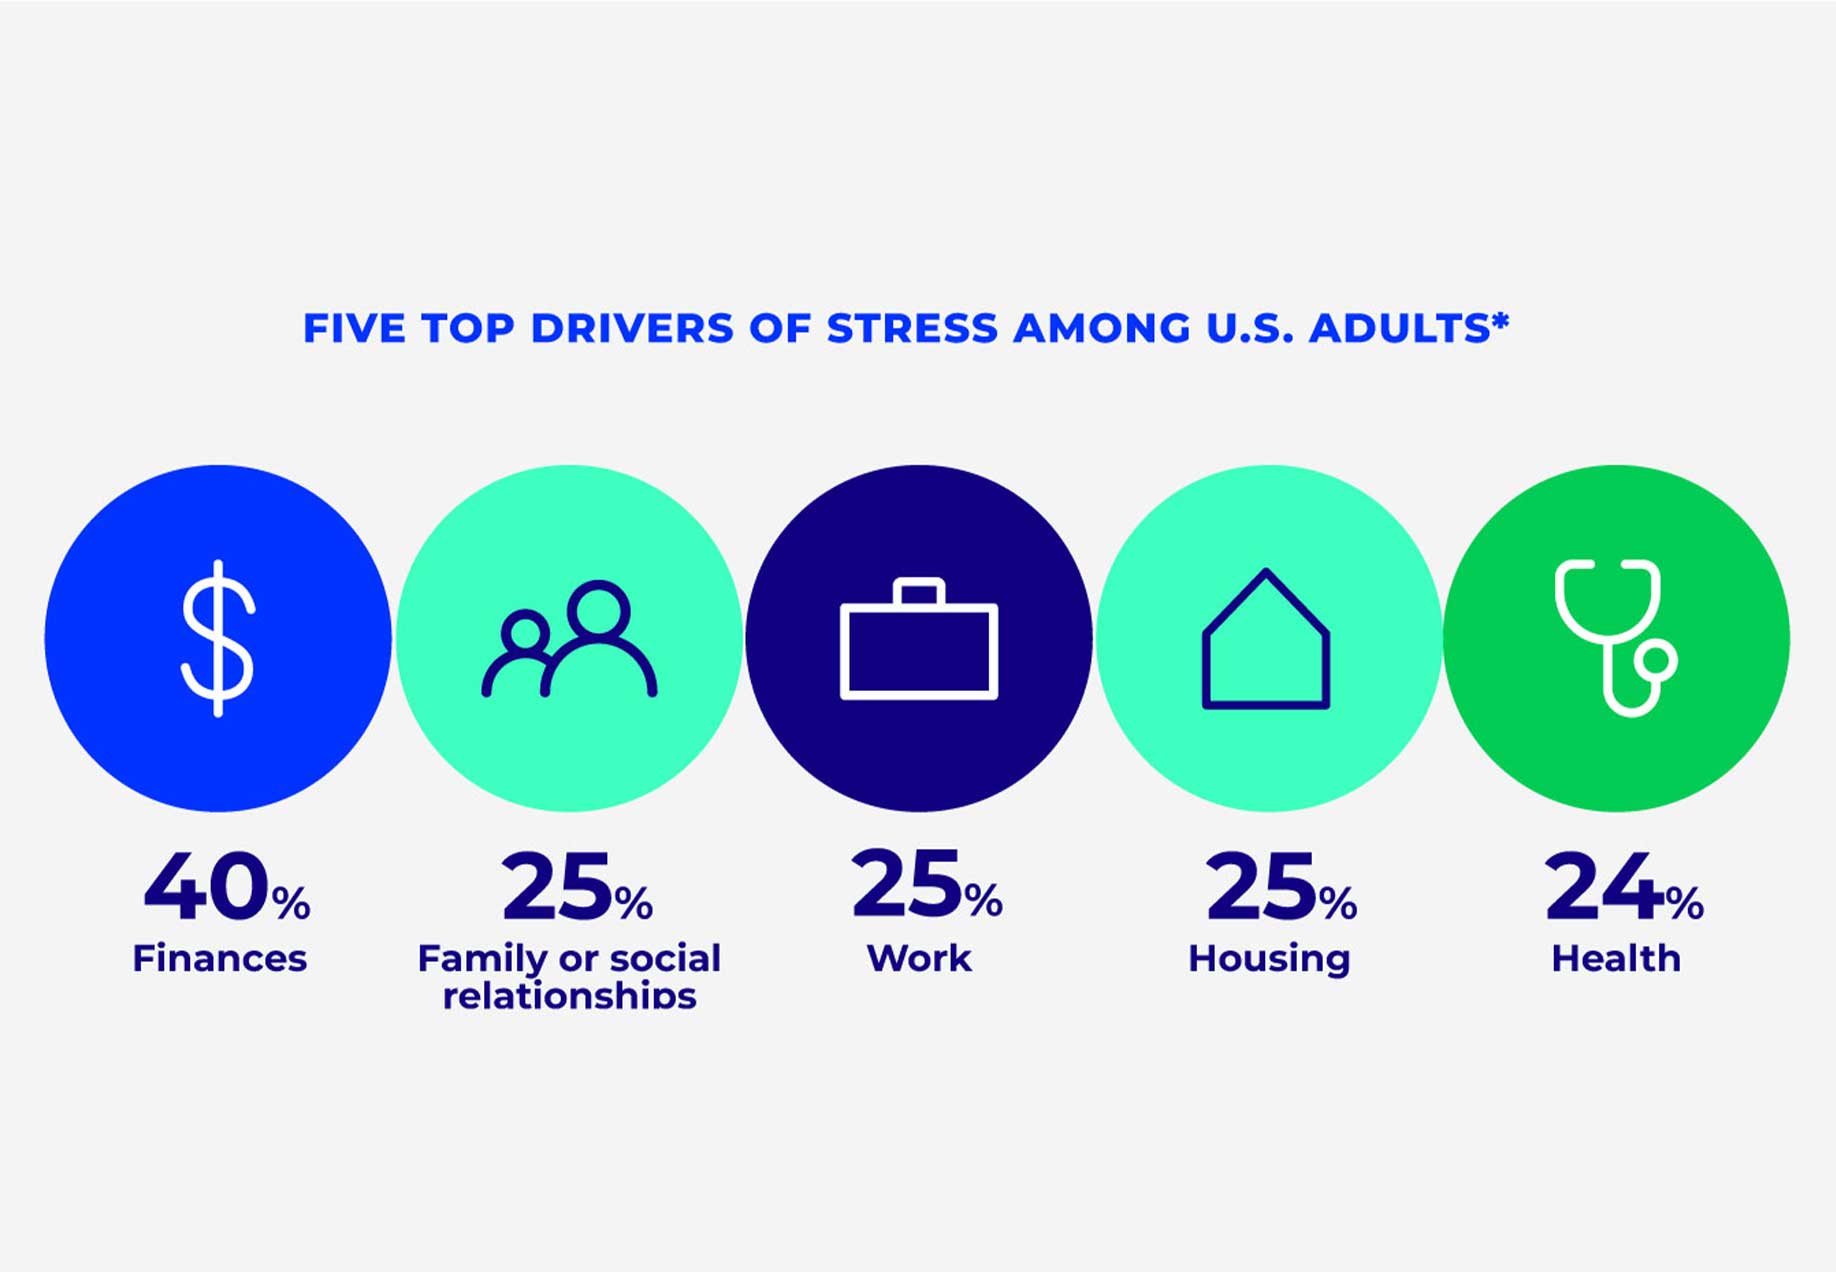 Adults are most stressed about their finances (40%), followed by their housing conditions (25%), work (25%), family or social relationships (25%), and health (24%).